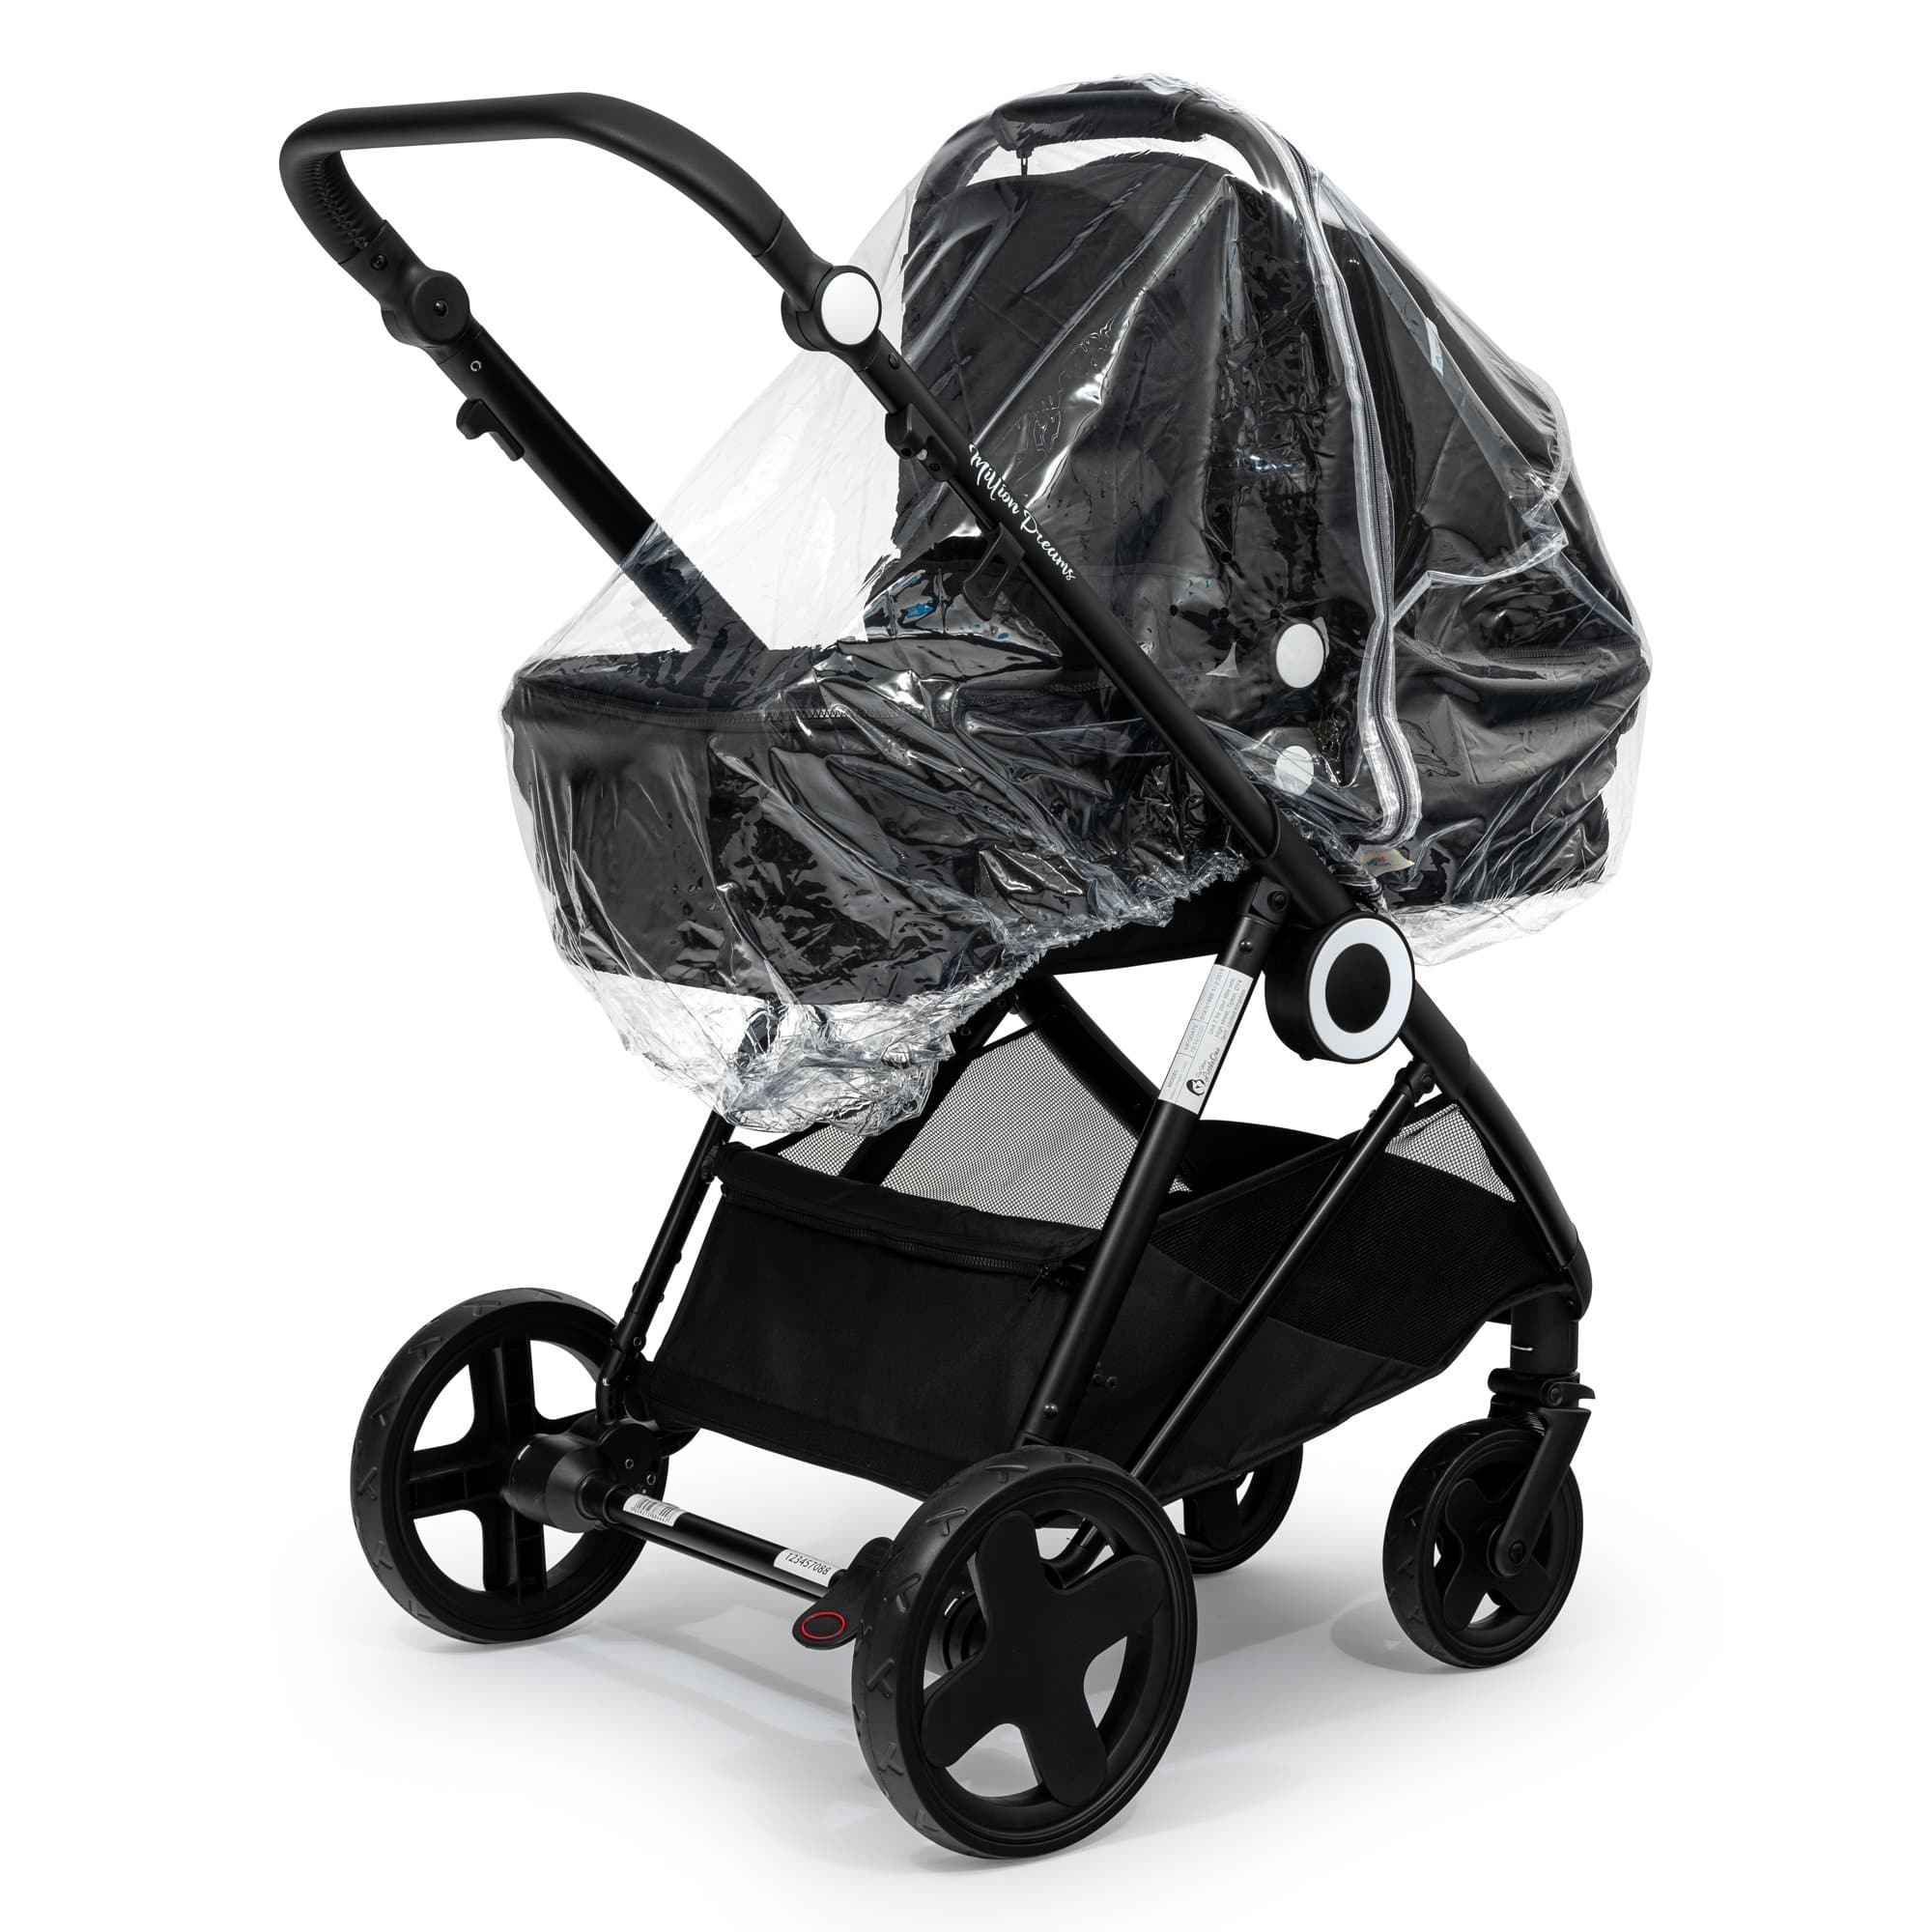 2 in 1 Rain Cover Compatible with Quinny - Fits All Models - For Your Little One